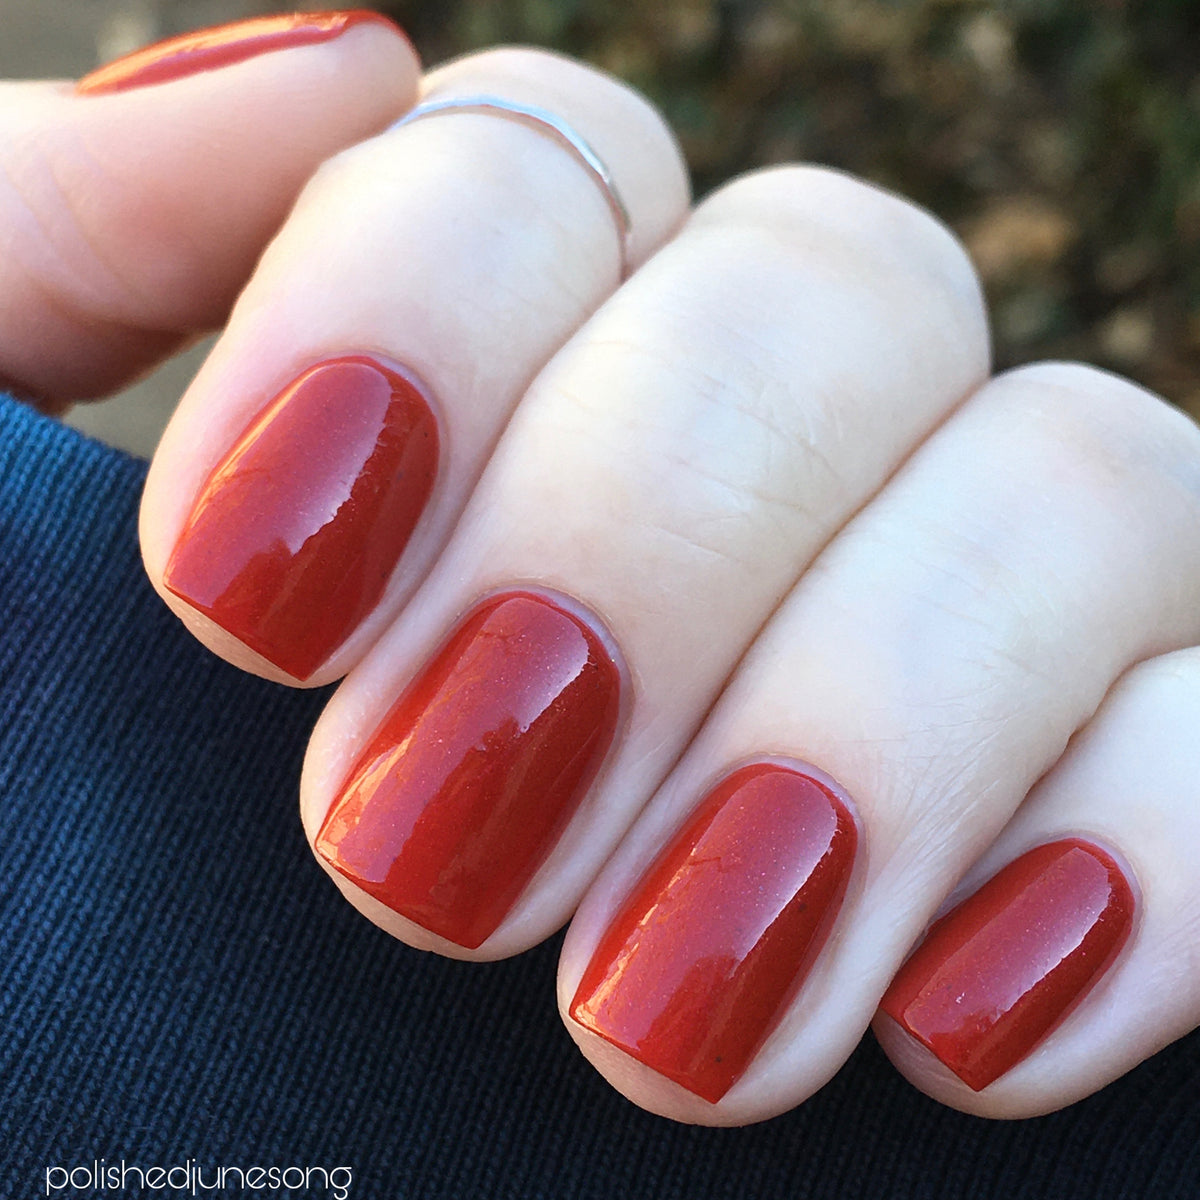 Blood Oath Nail Polish - true red creme with flecks of black & – Fanchromatic Nails